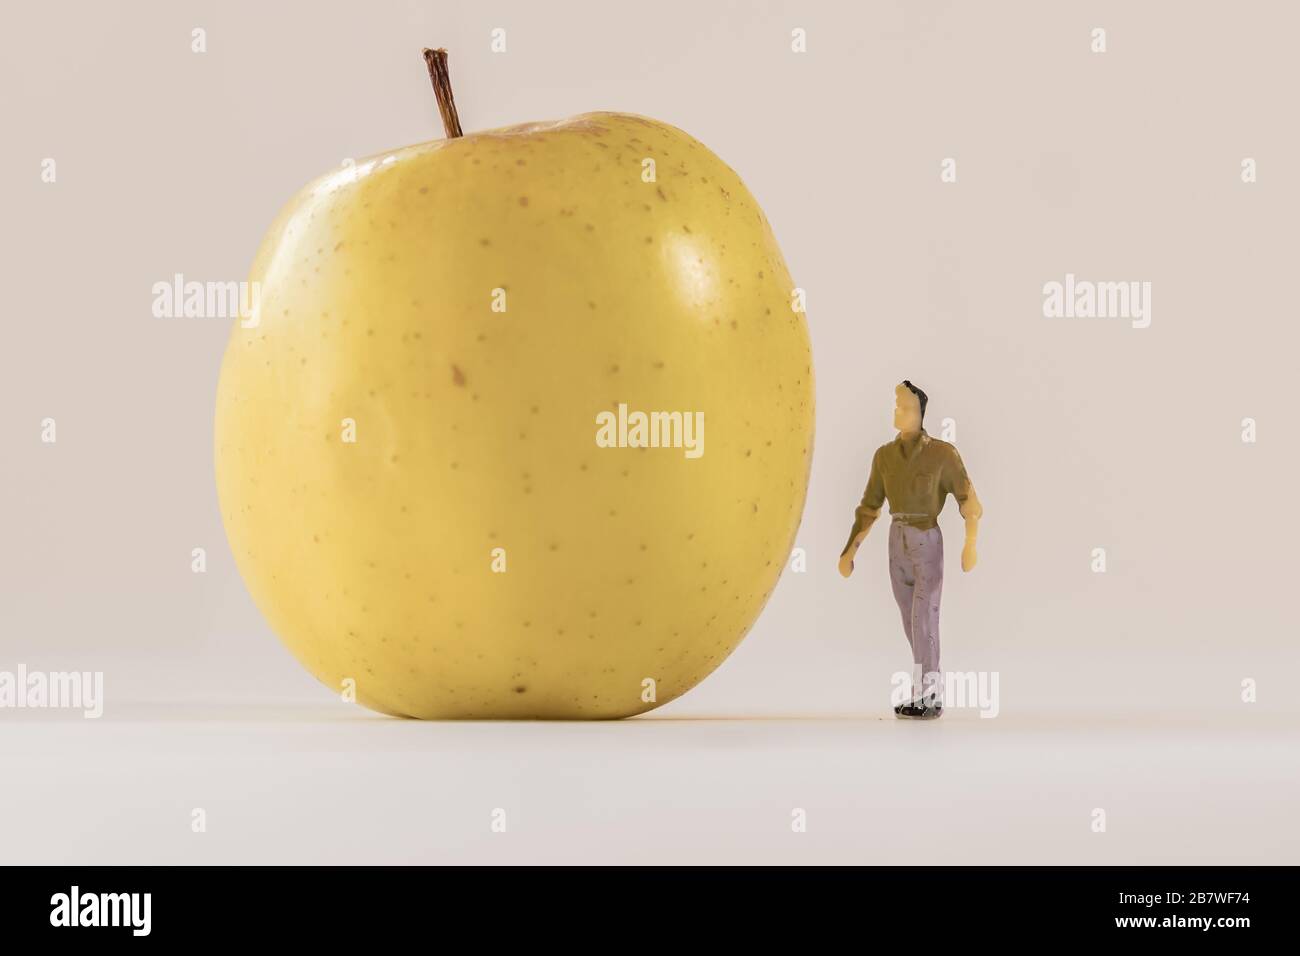 Miniature man figure standing next to big yellow apple. Shallow depth of field background. Healthcare, healthy lifestyles and slimming concept. Stock Photo